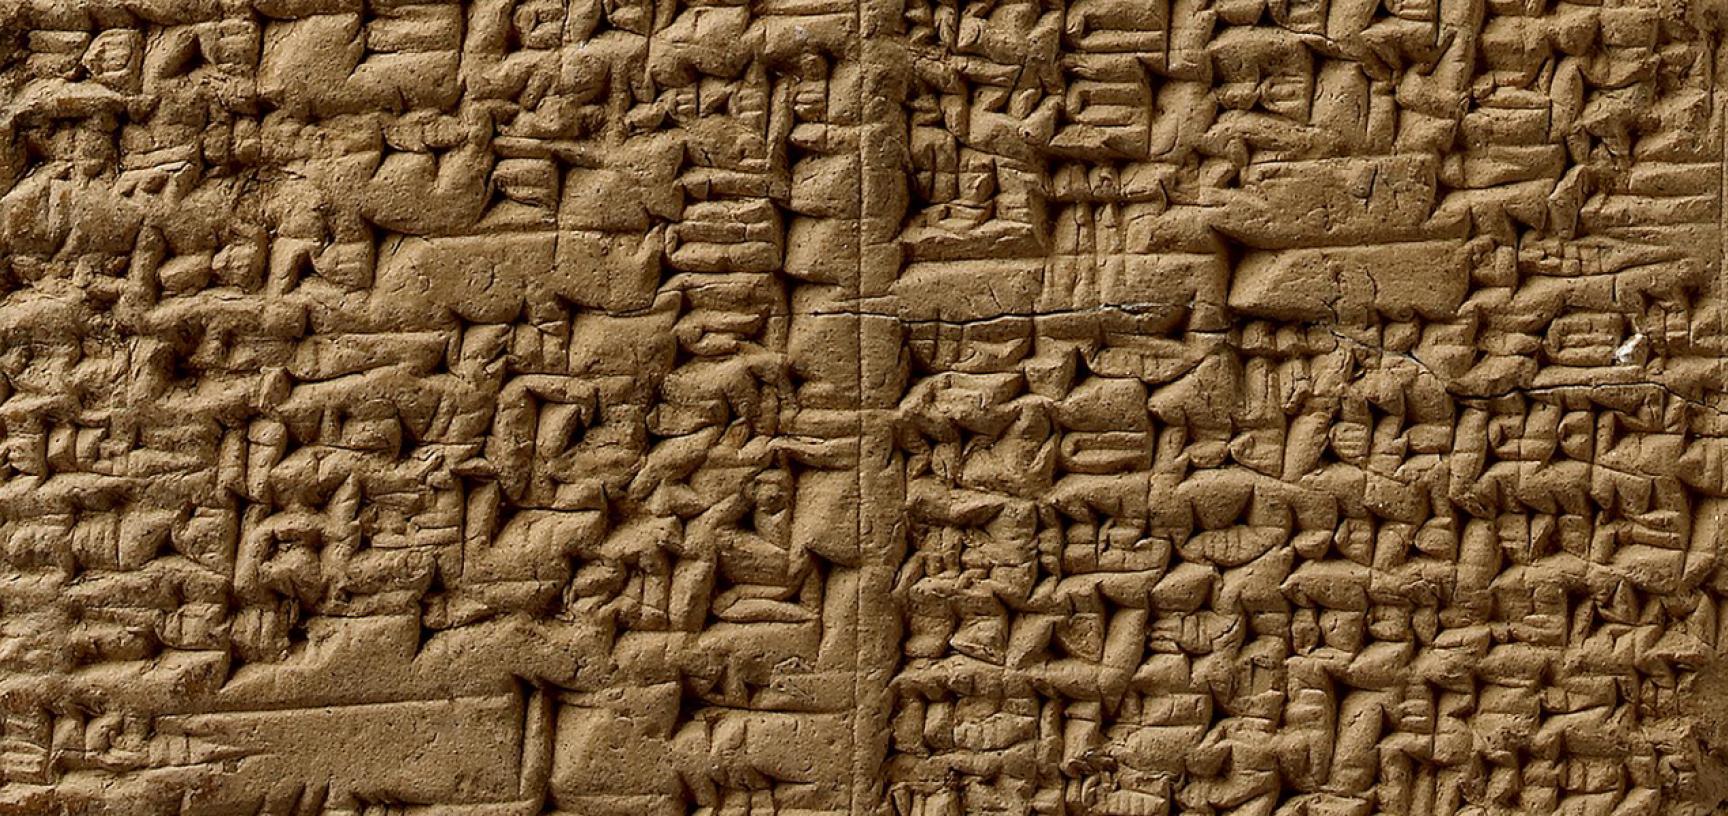 SUMERIAN KING LIST (detail) from the Ashmolean collections